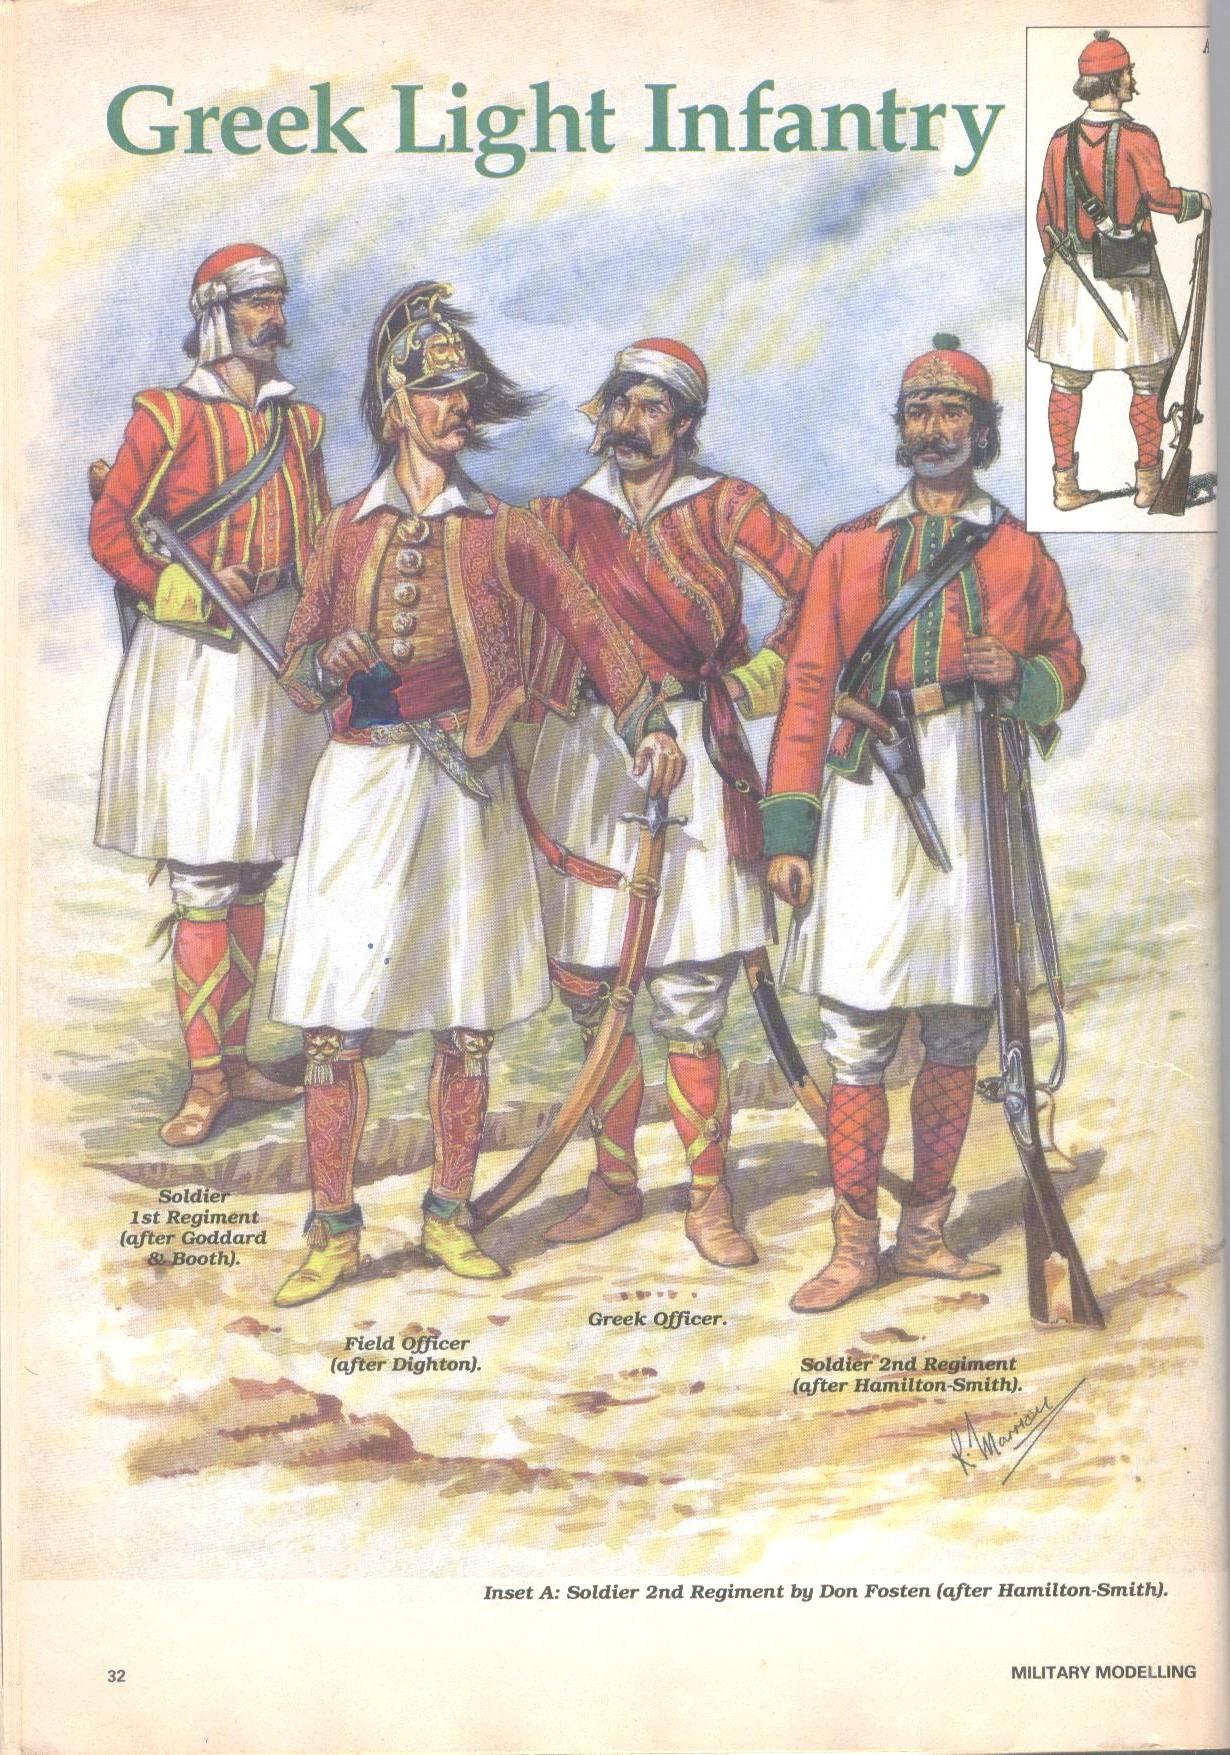 Private Greek Light Infantry, Second Regiment,, English Arny,1812